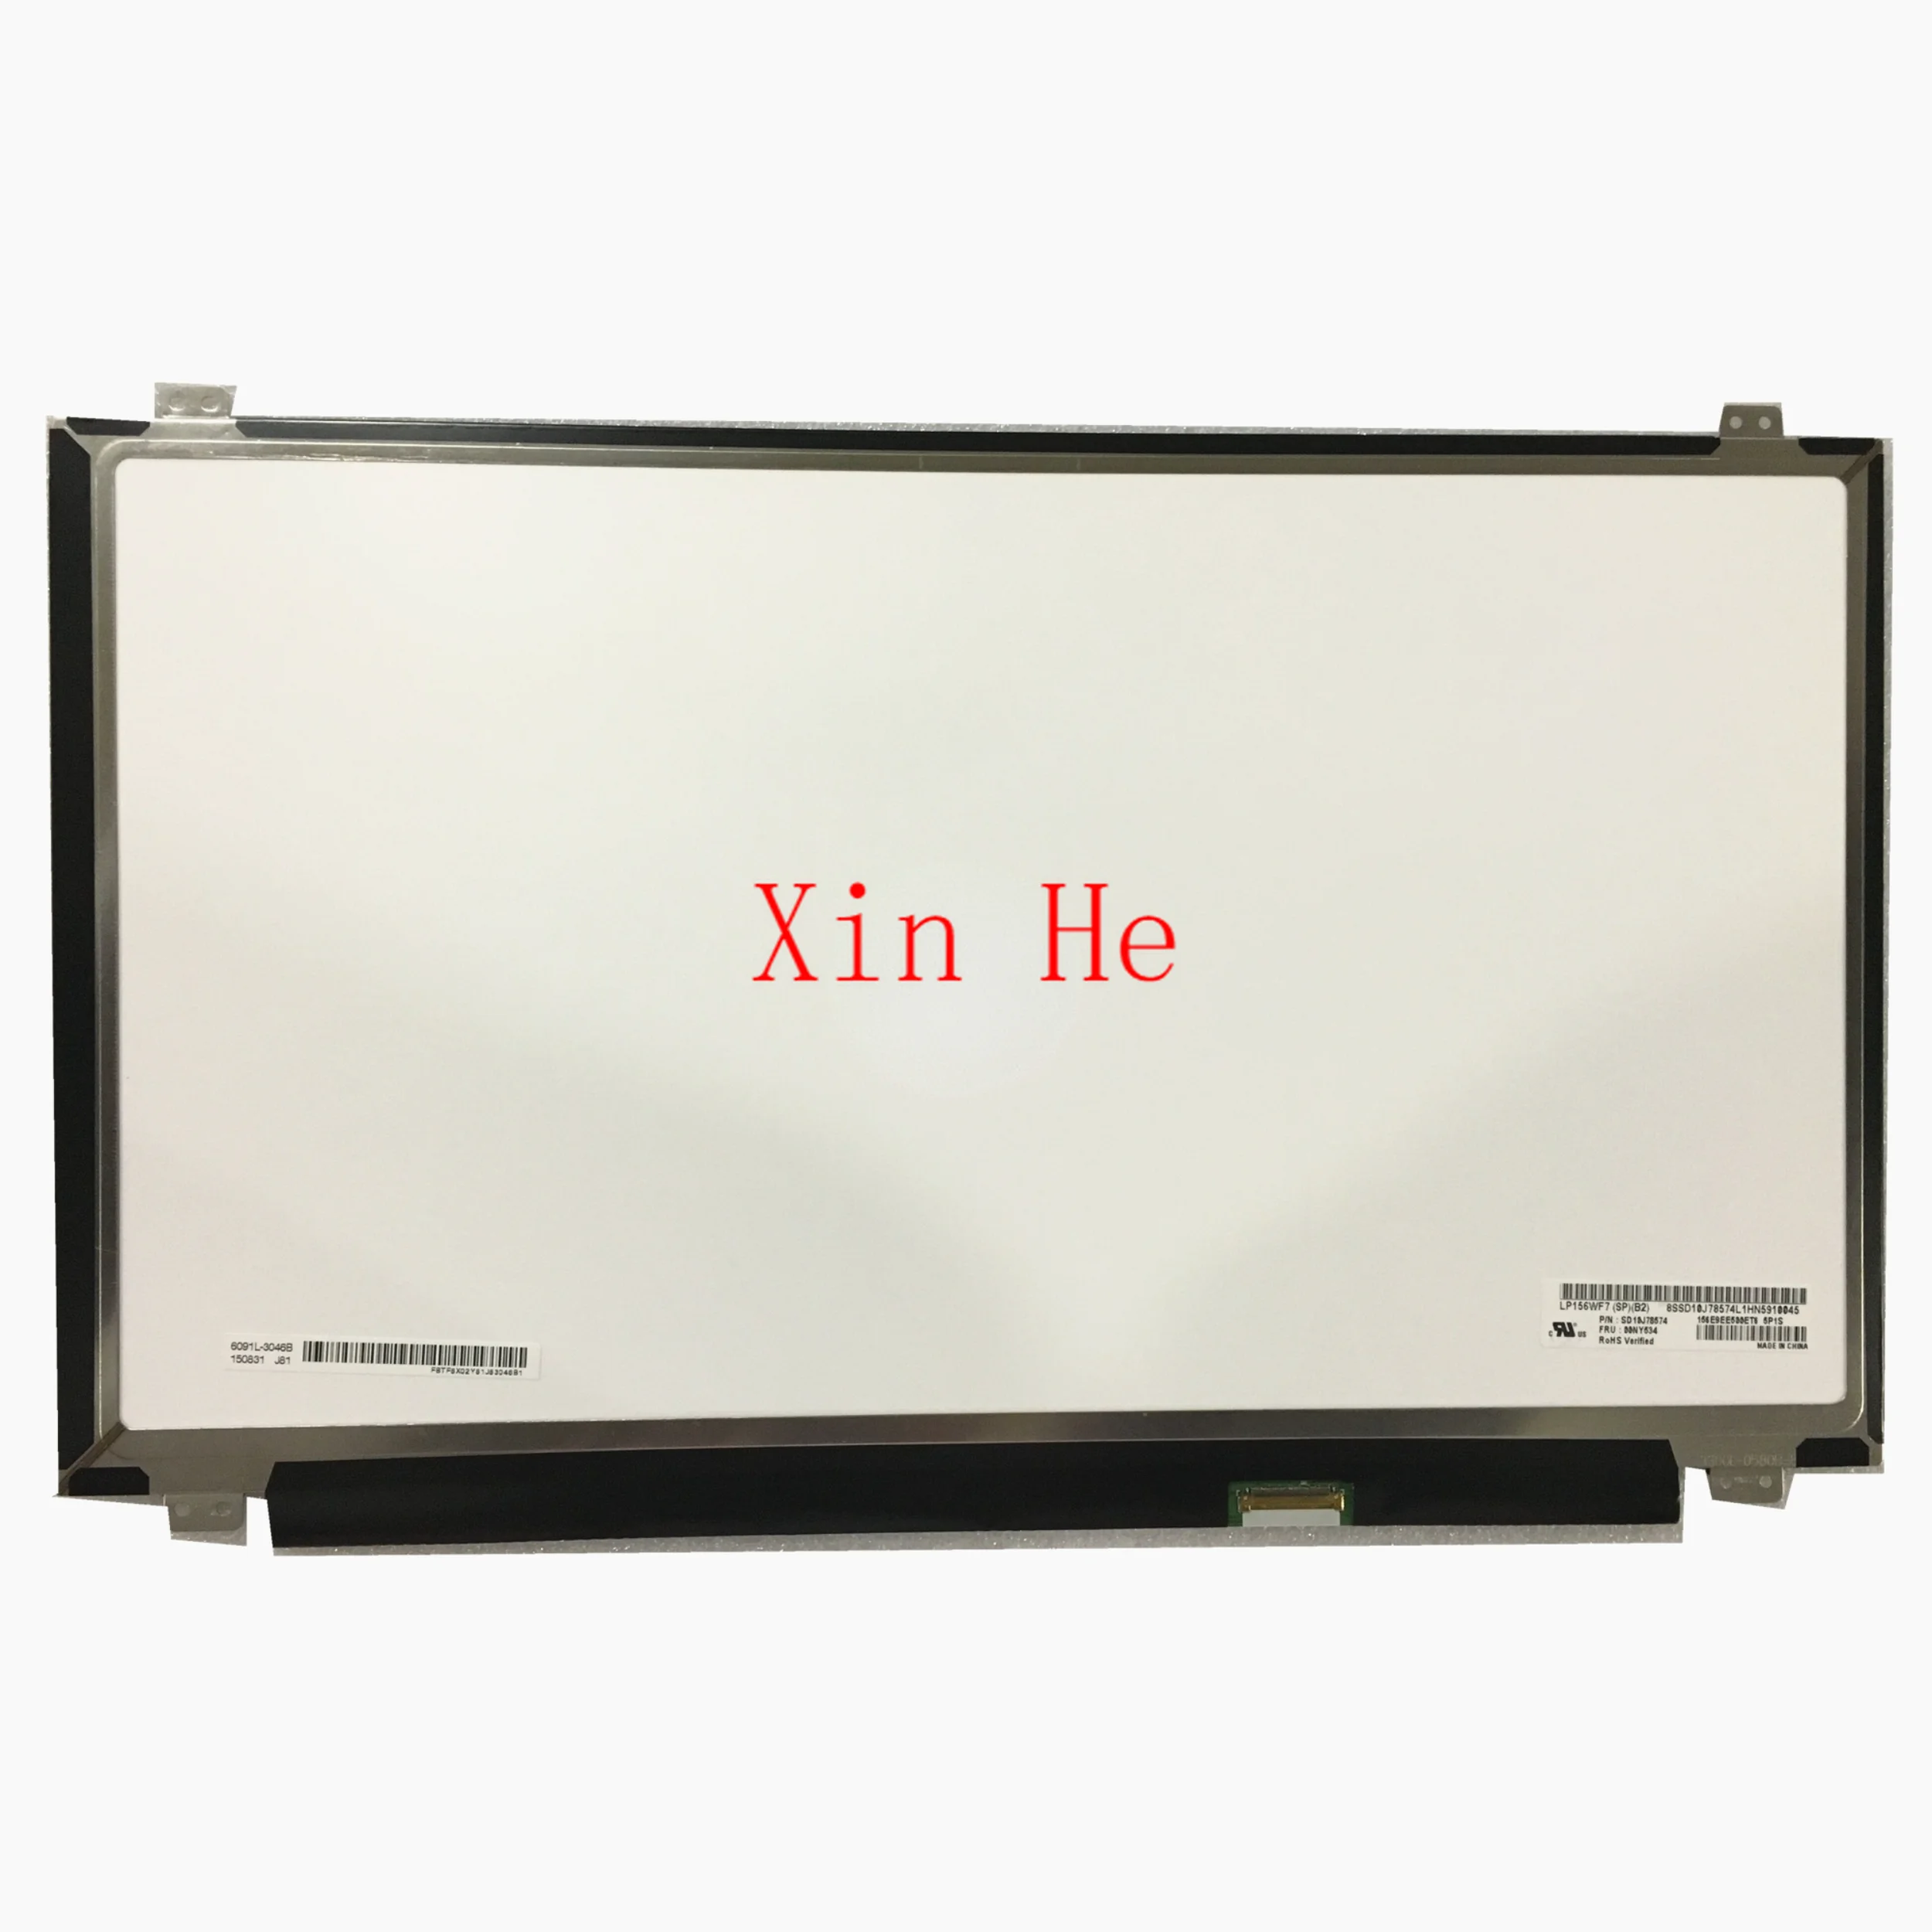 

LP156WF7-SPB2 LP156WF7 SPB2 fit Lenovo thinkpad P50 Laptop Lcd Touch Screen with FRU: 00NY534 1920*1080 with small scratches